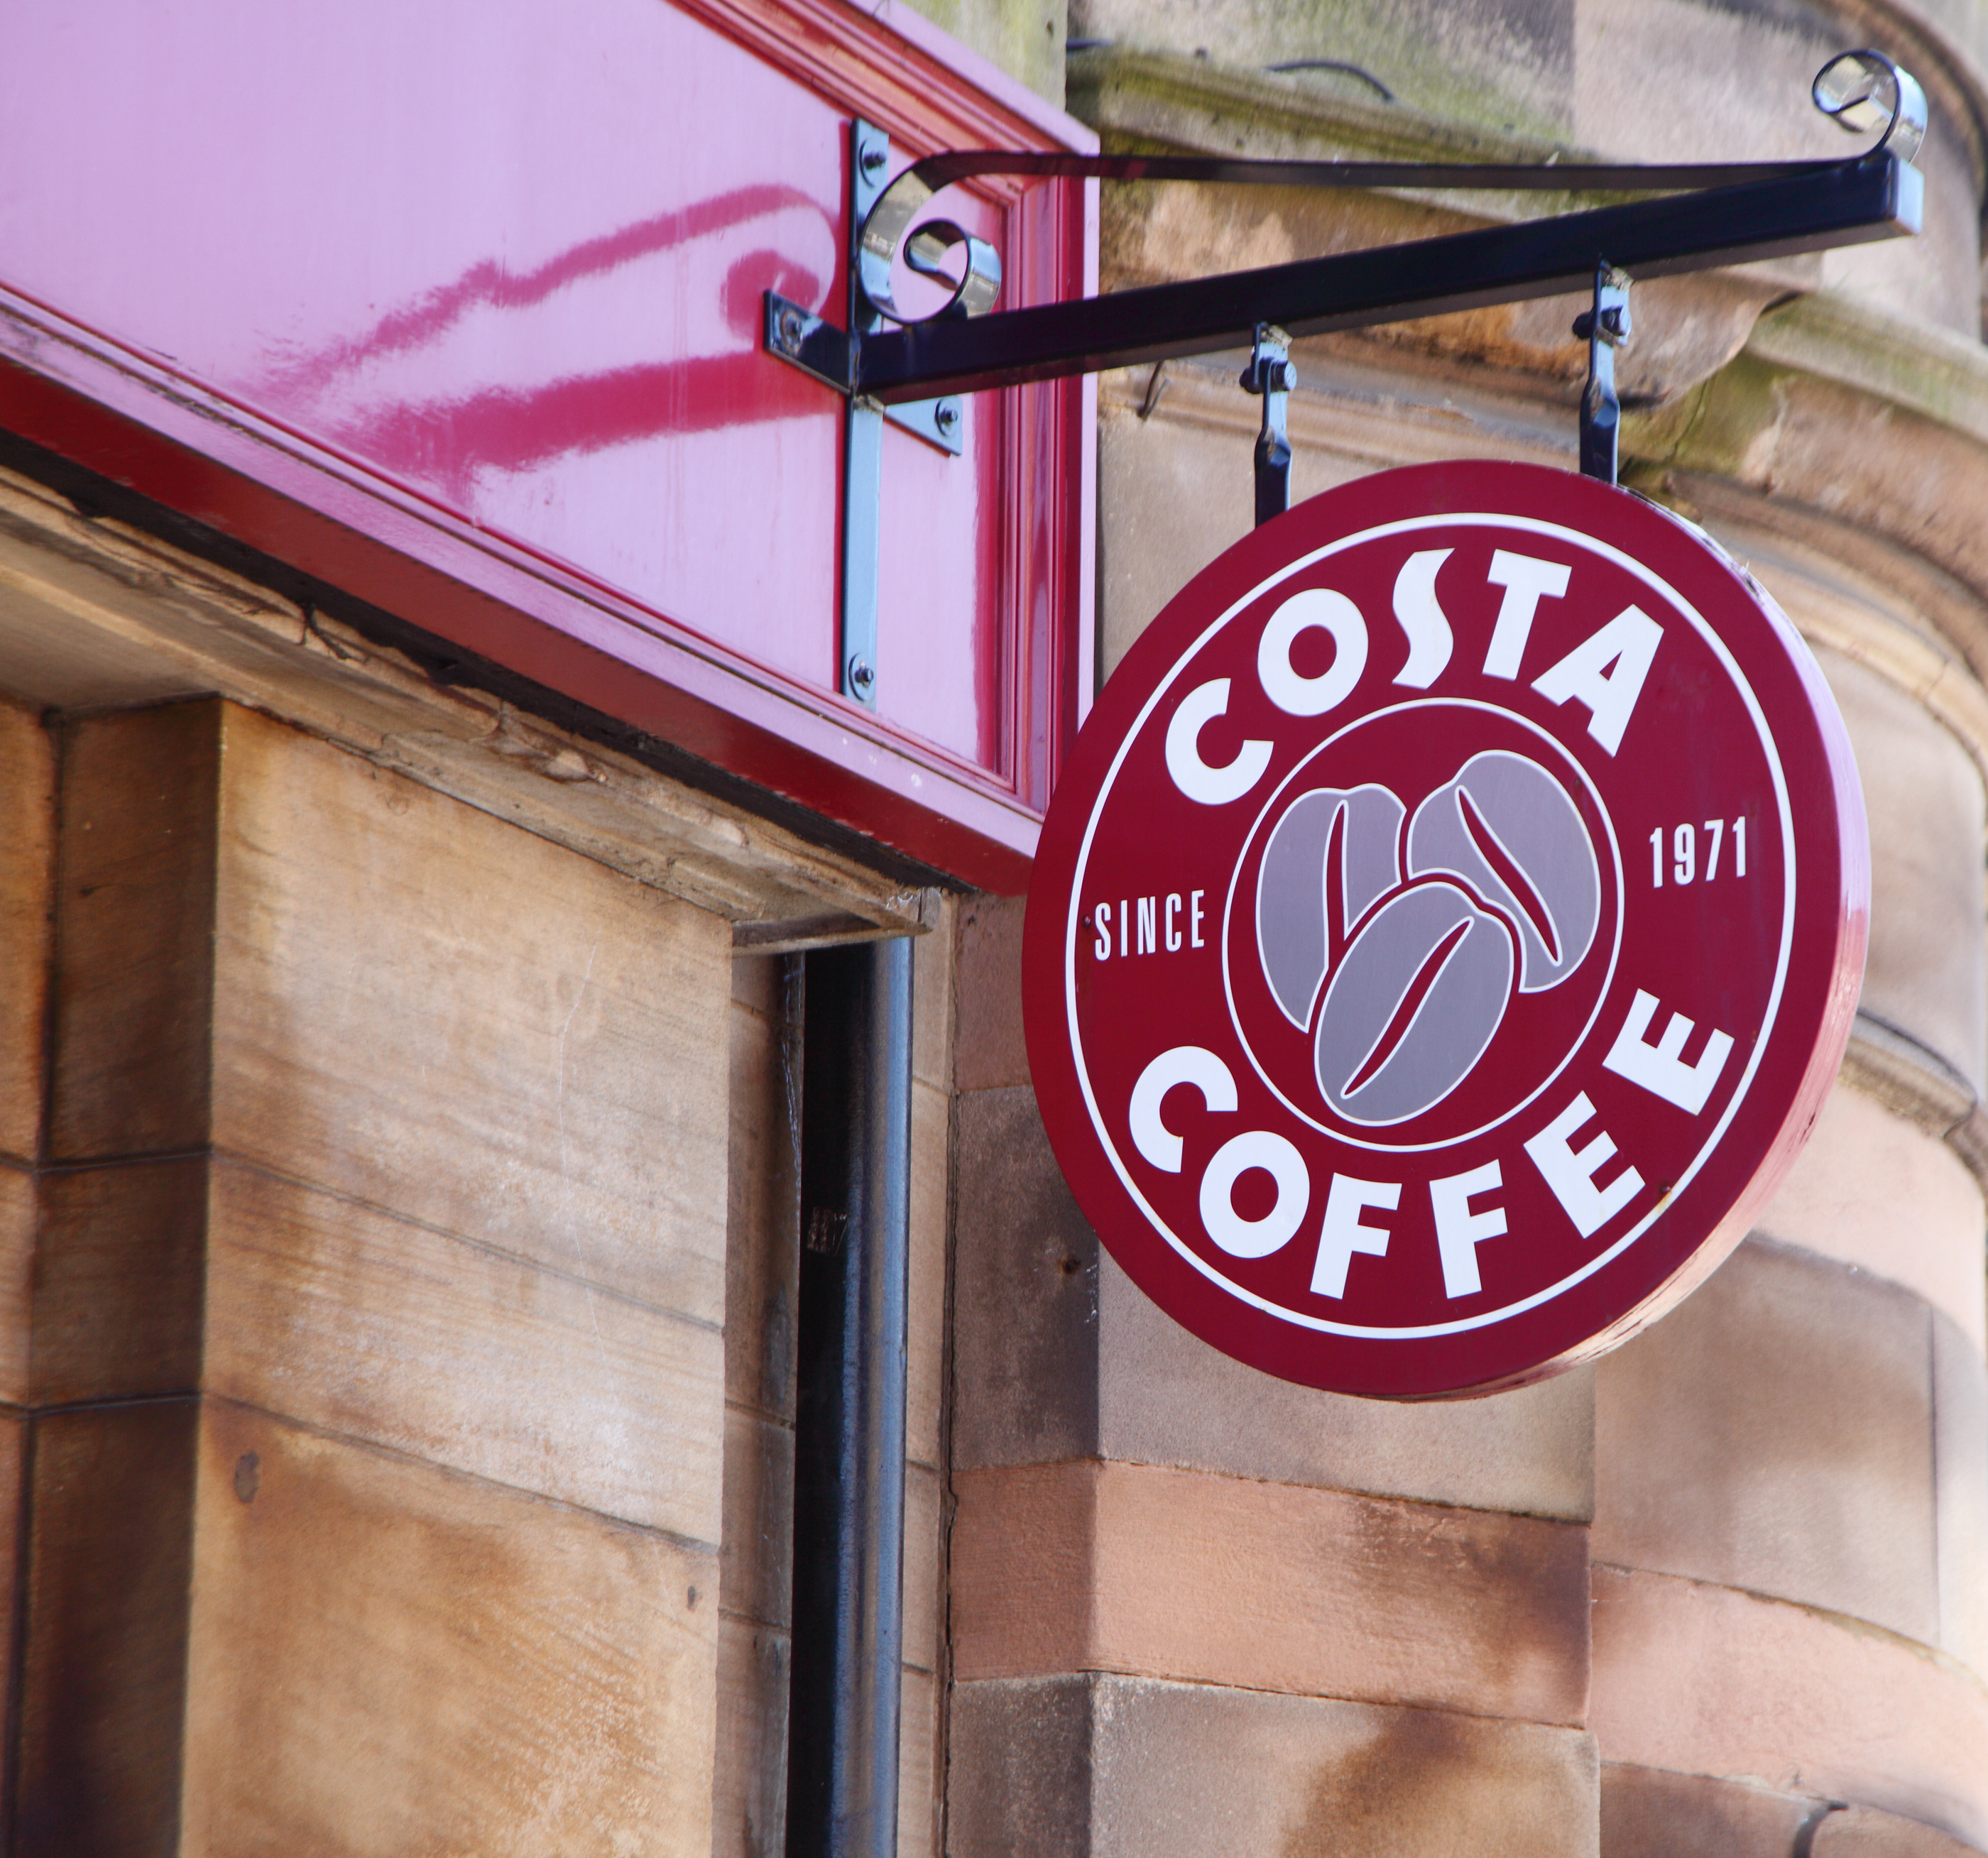 Costa Coffee has over 2,000 stores in the UK